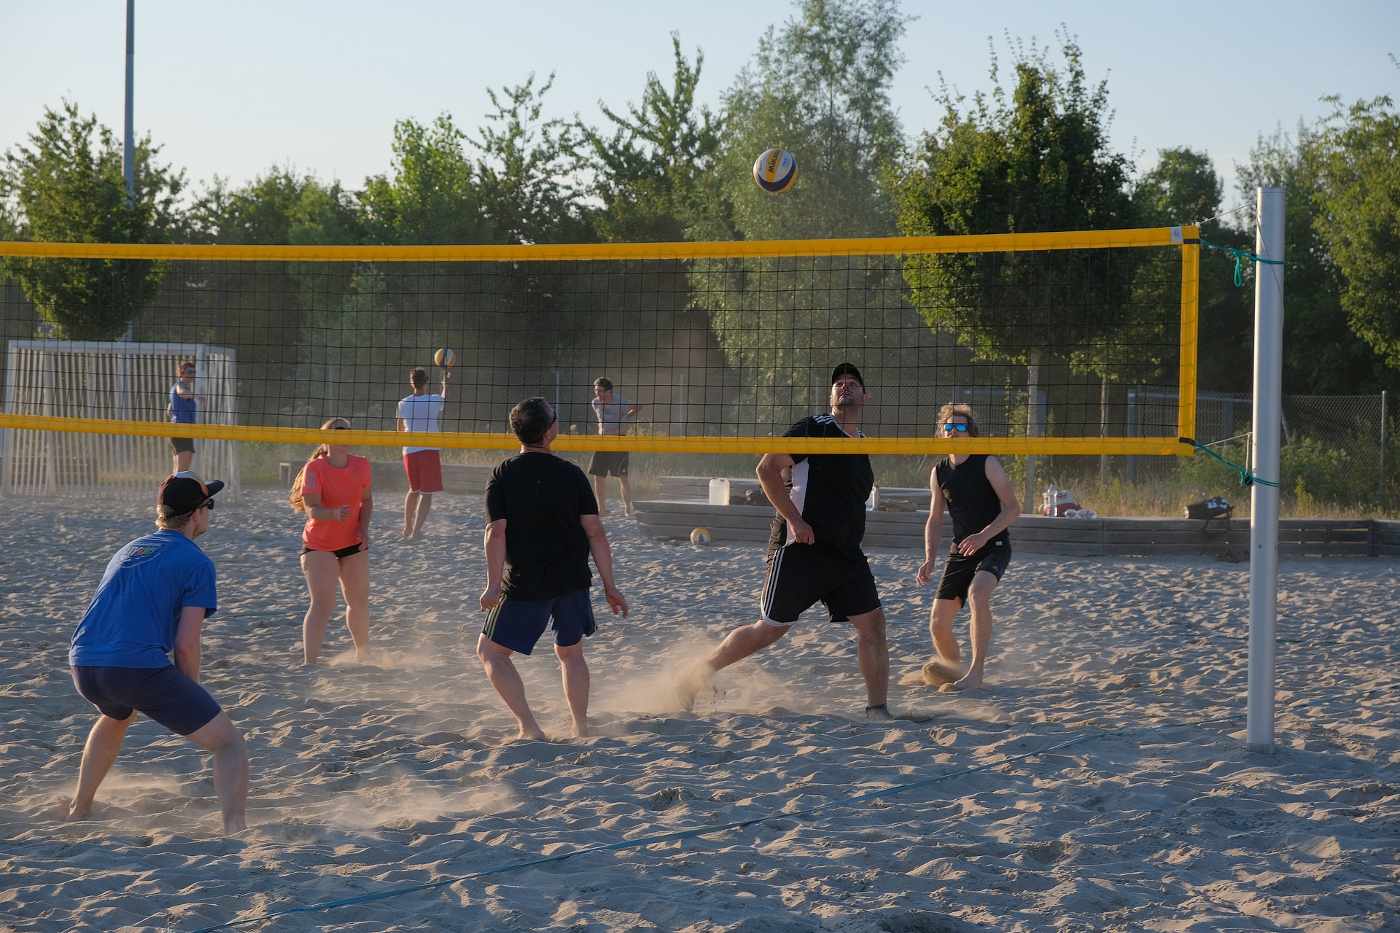 Outdoor volleyball game - Best camping activities for teens